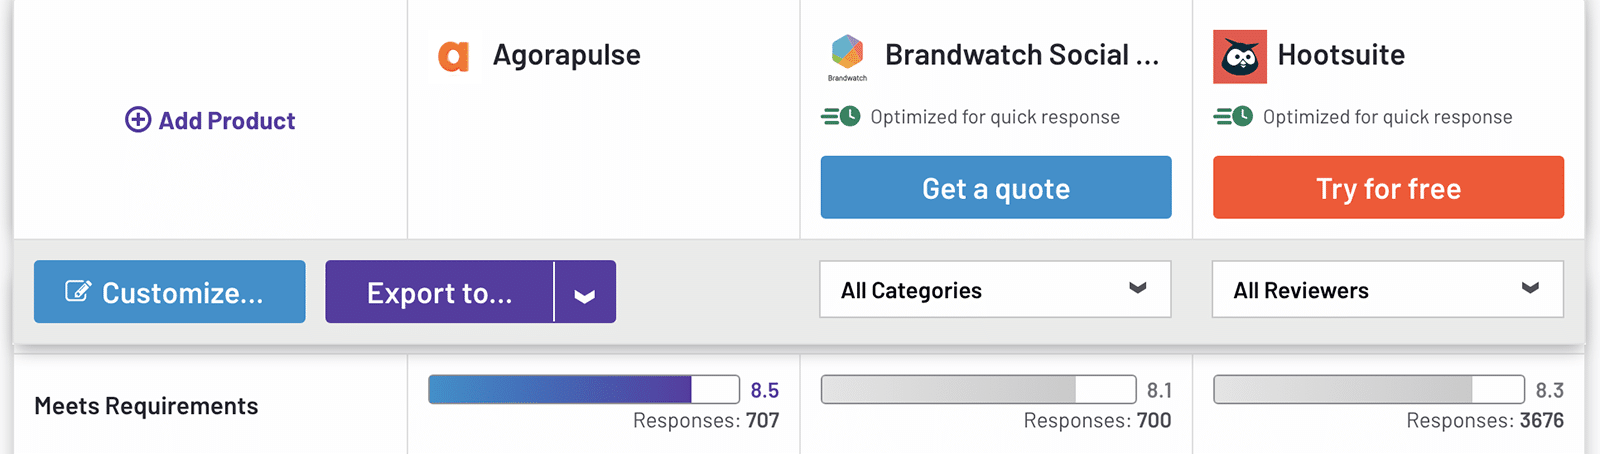 G2 comparison between Agorapulse, Brandwatch, and Hootsuite showing requirements